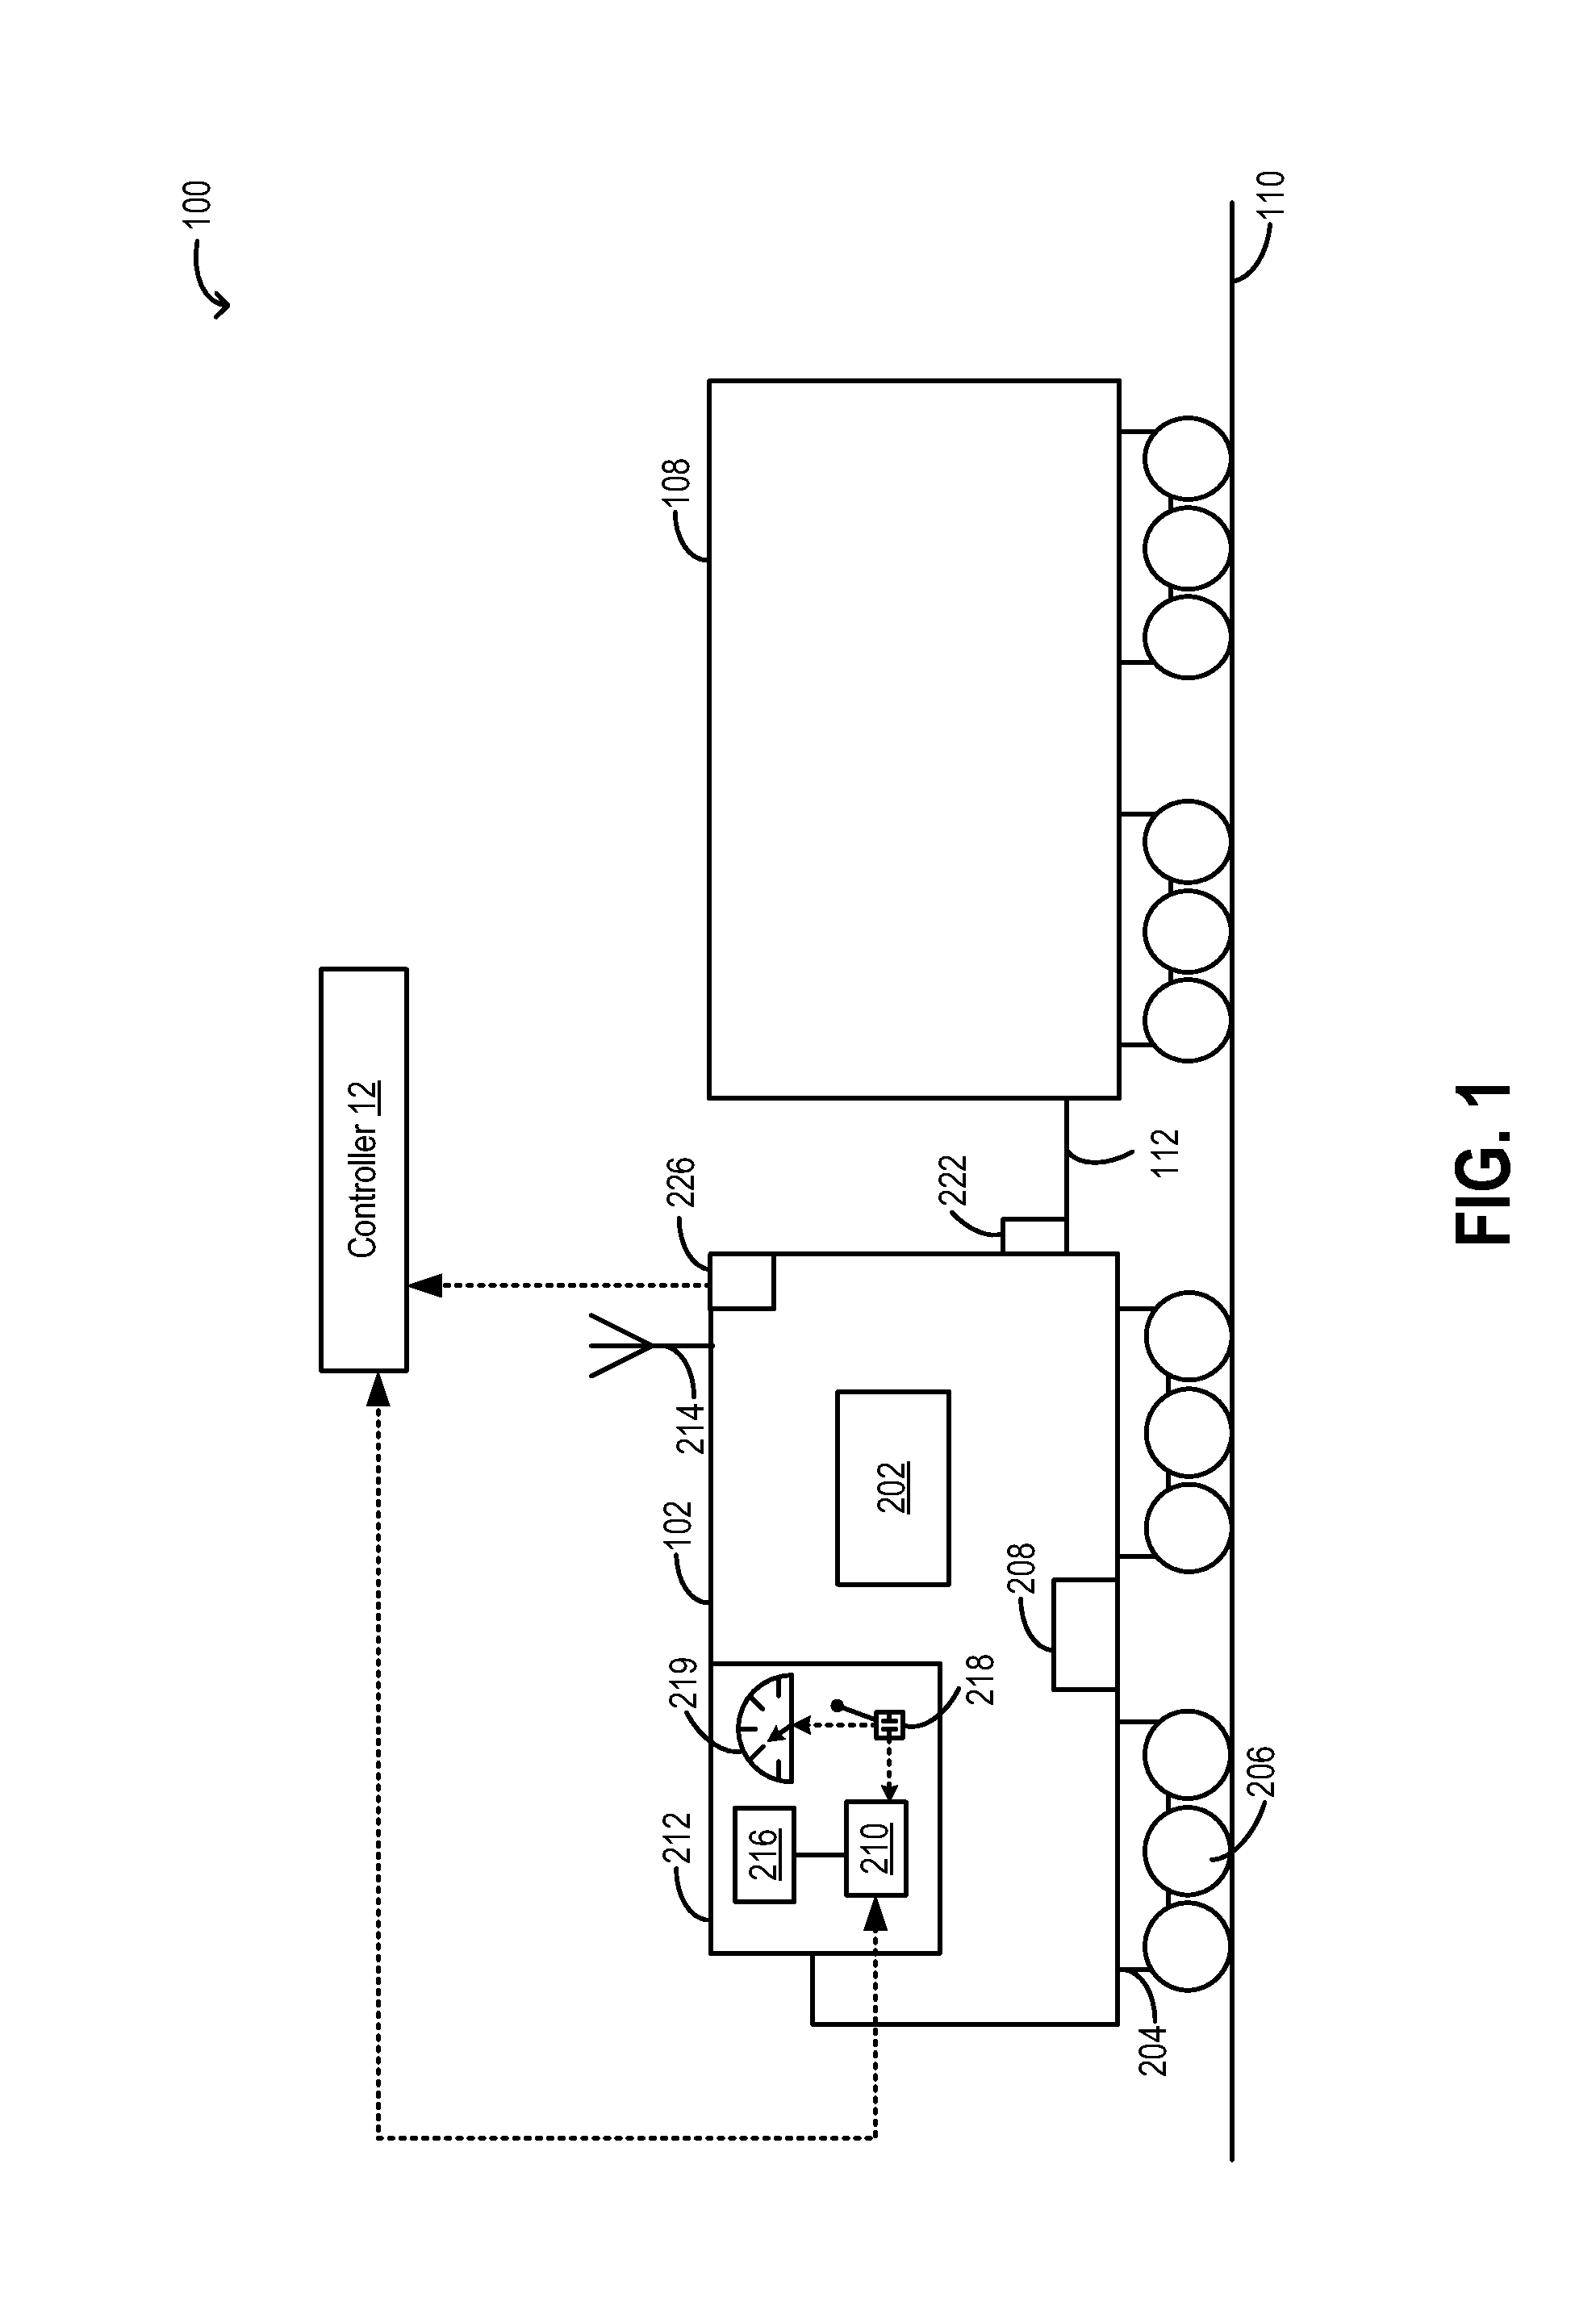 Method and system for engine emission control